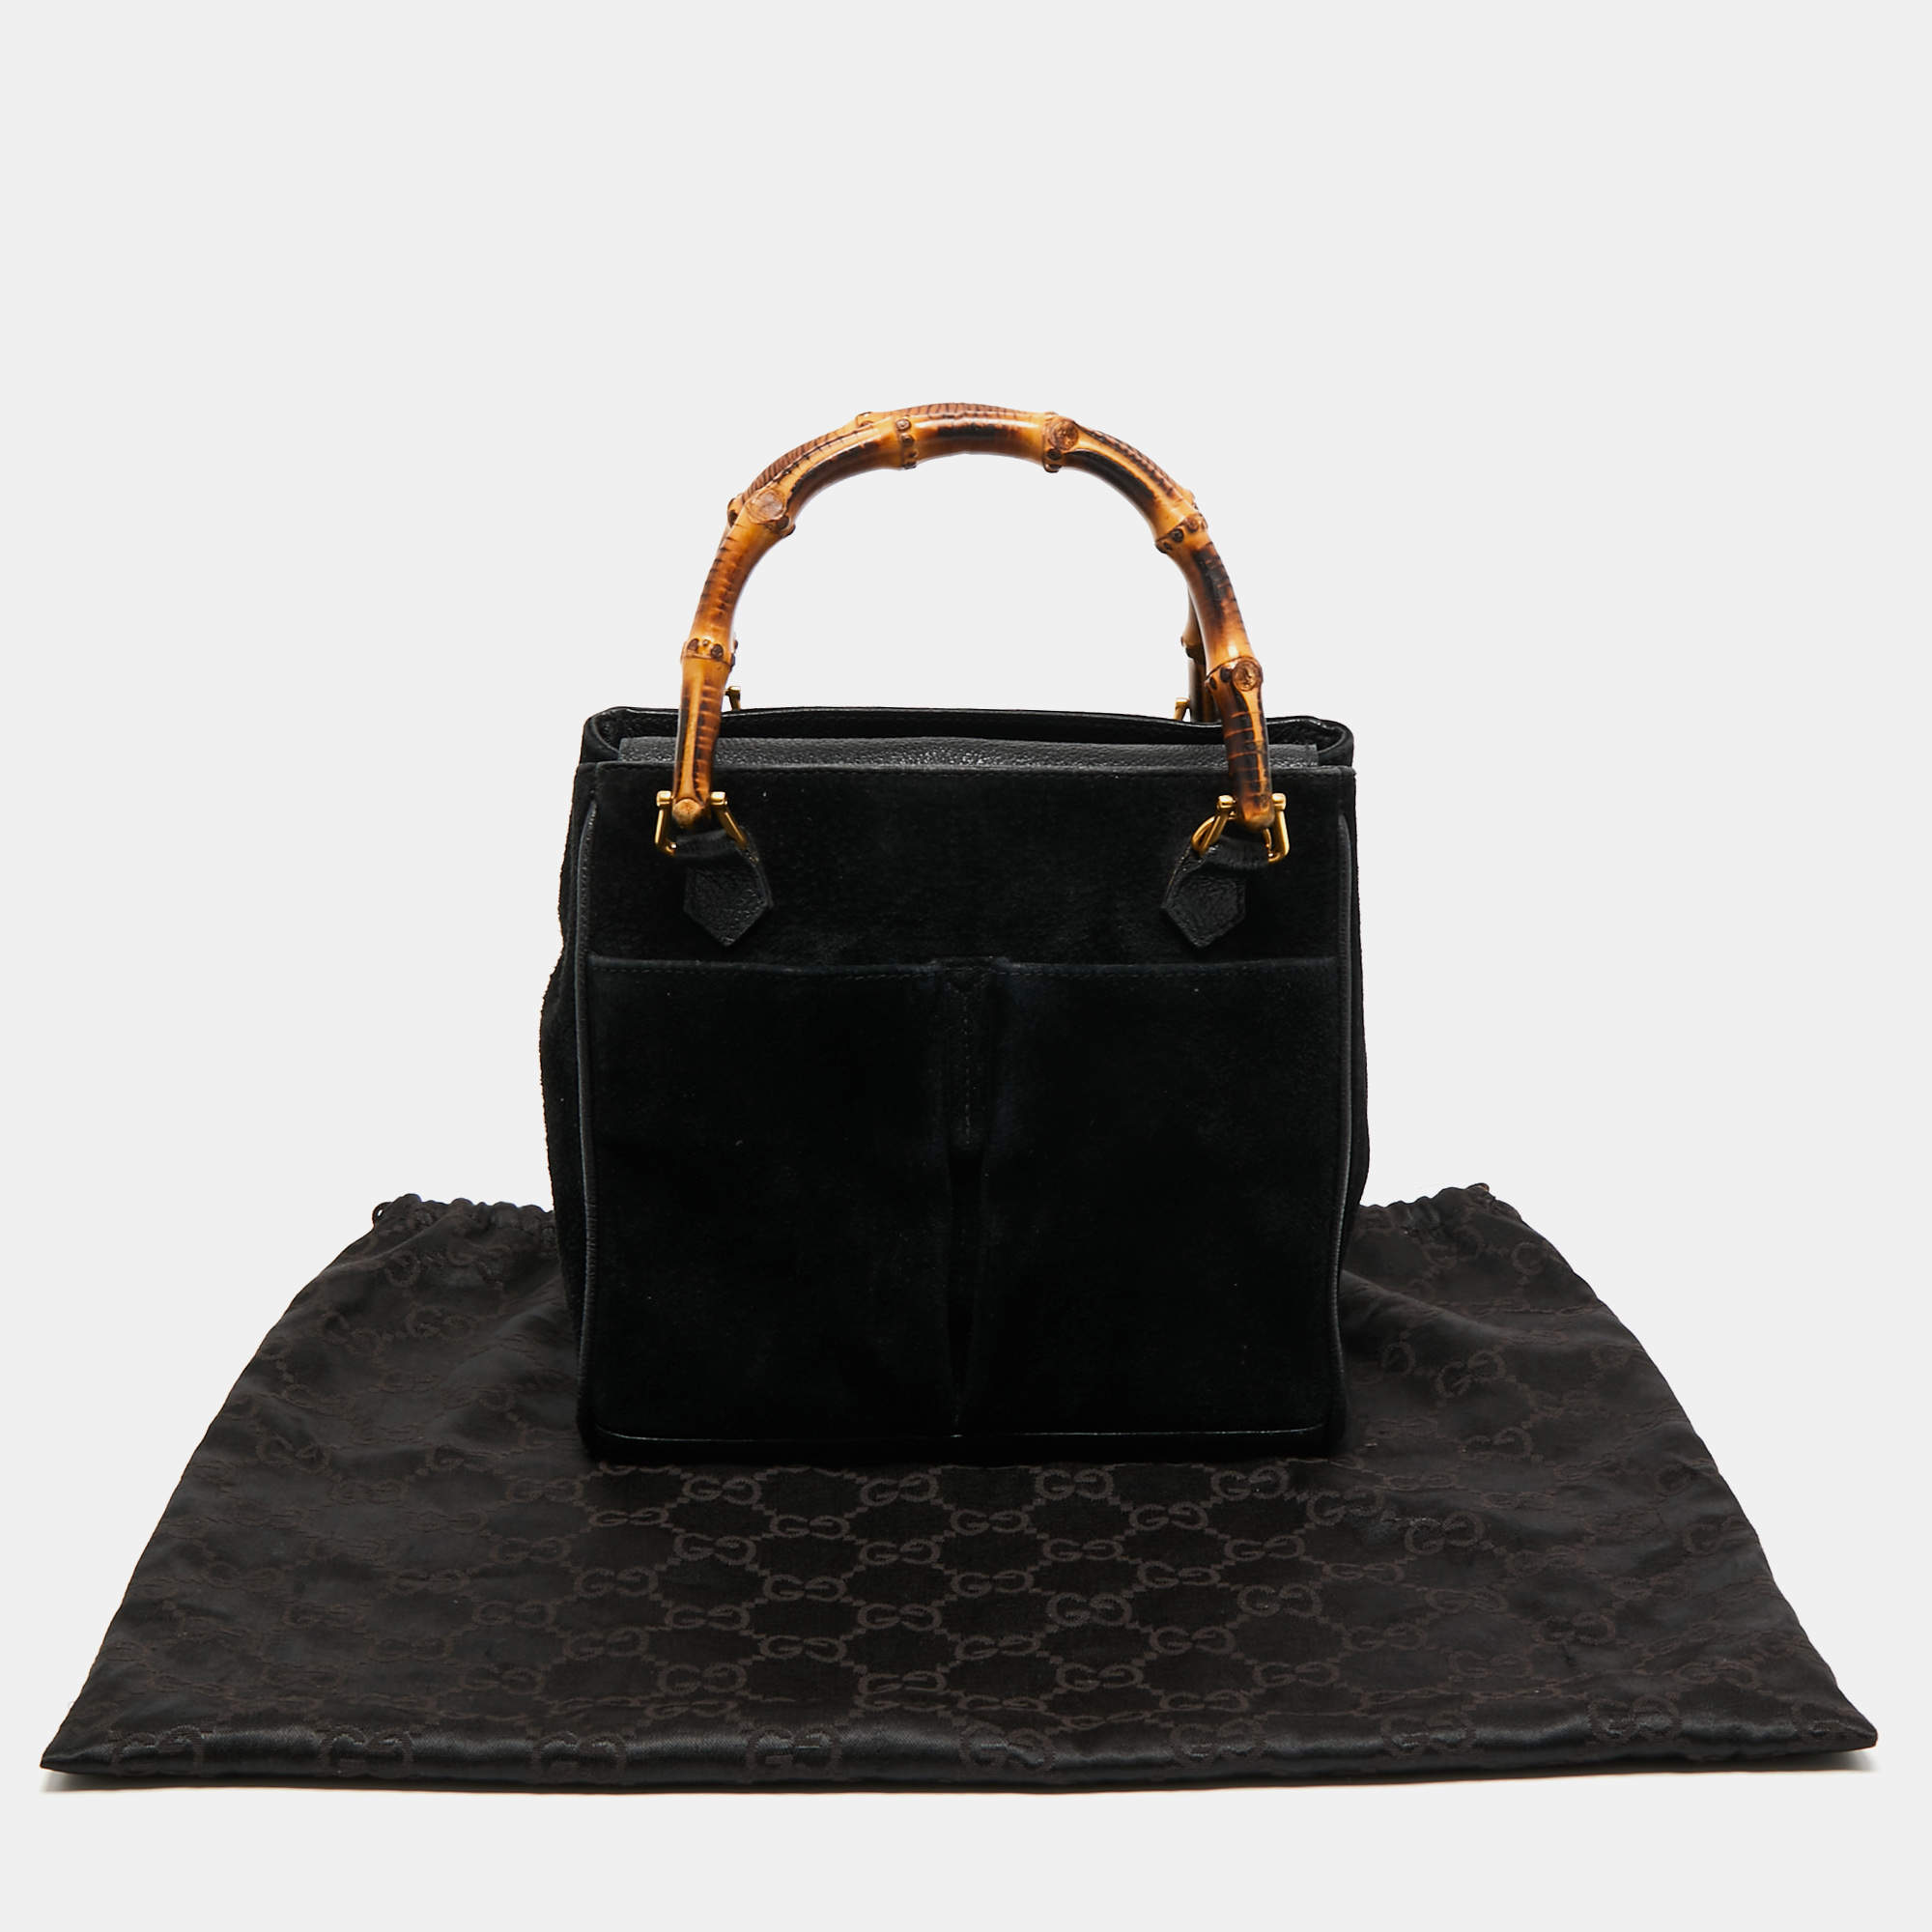 Gucci Black Suede Bamboo Tote 2way Crossbody Bag 62gz421s – Bagriculture